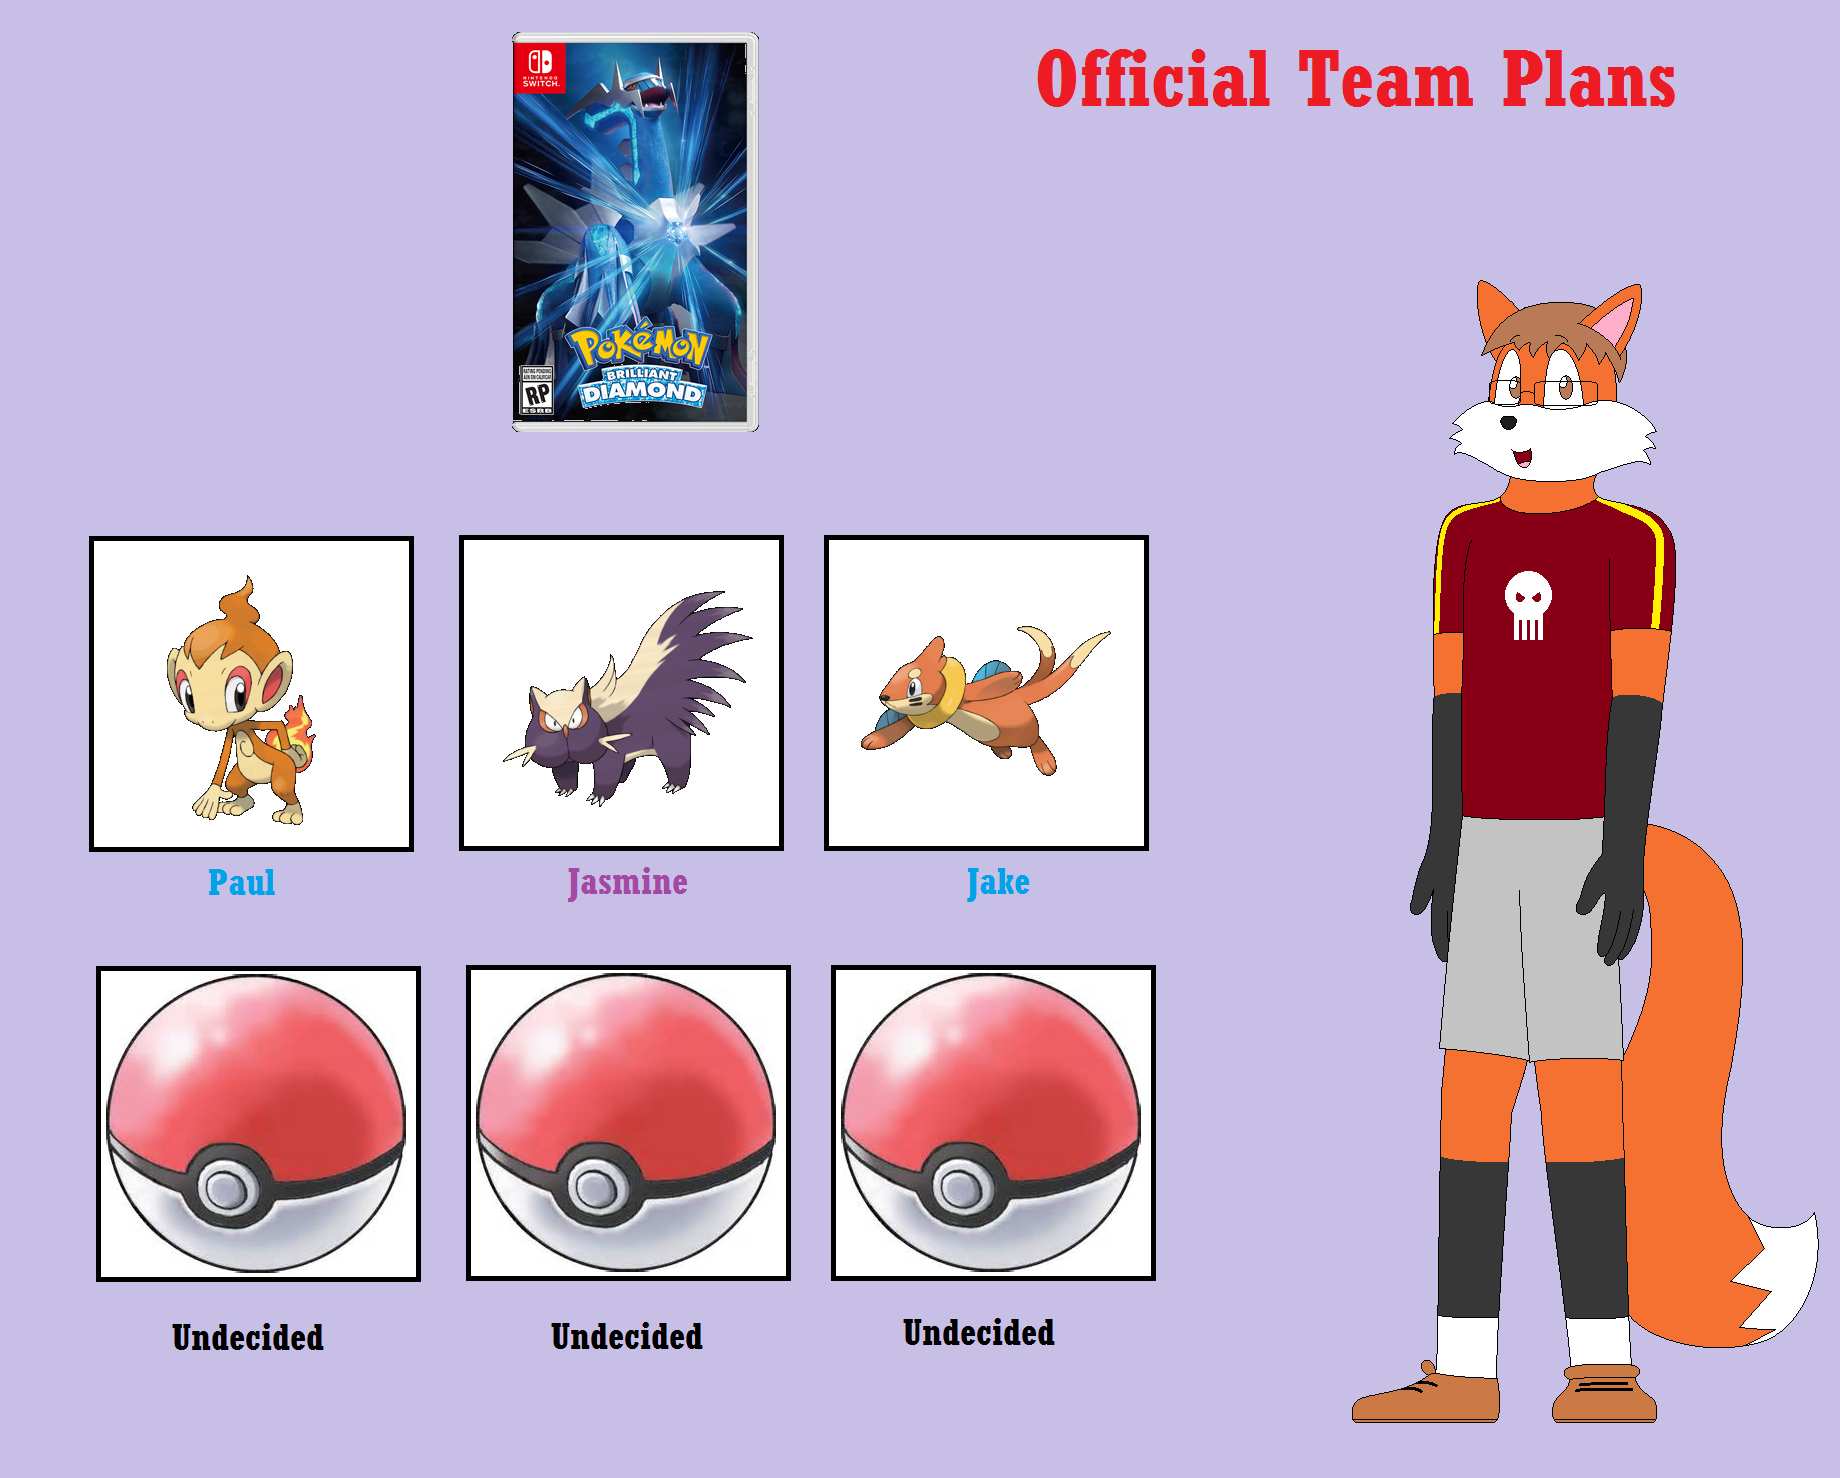 Pokemon Brilliant Diamond Version Official Team Plans UD1 by acr